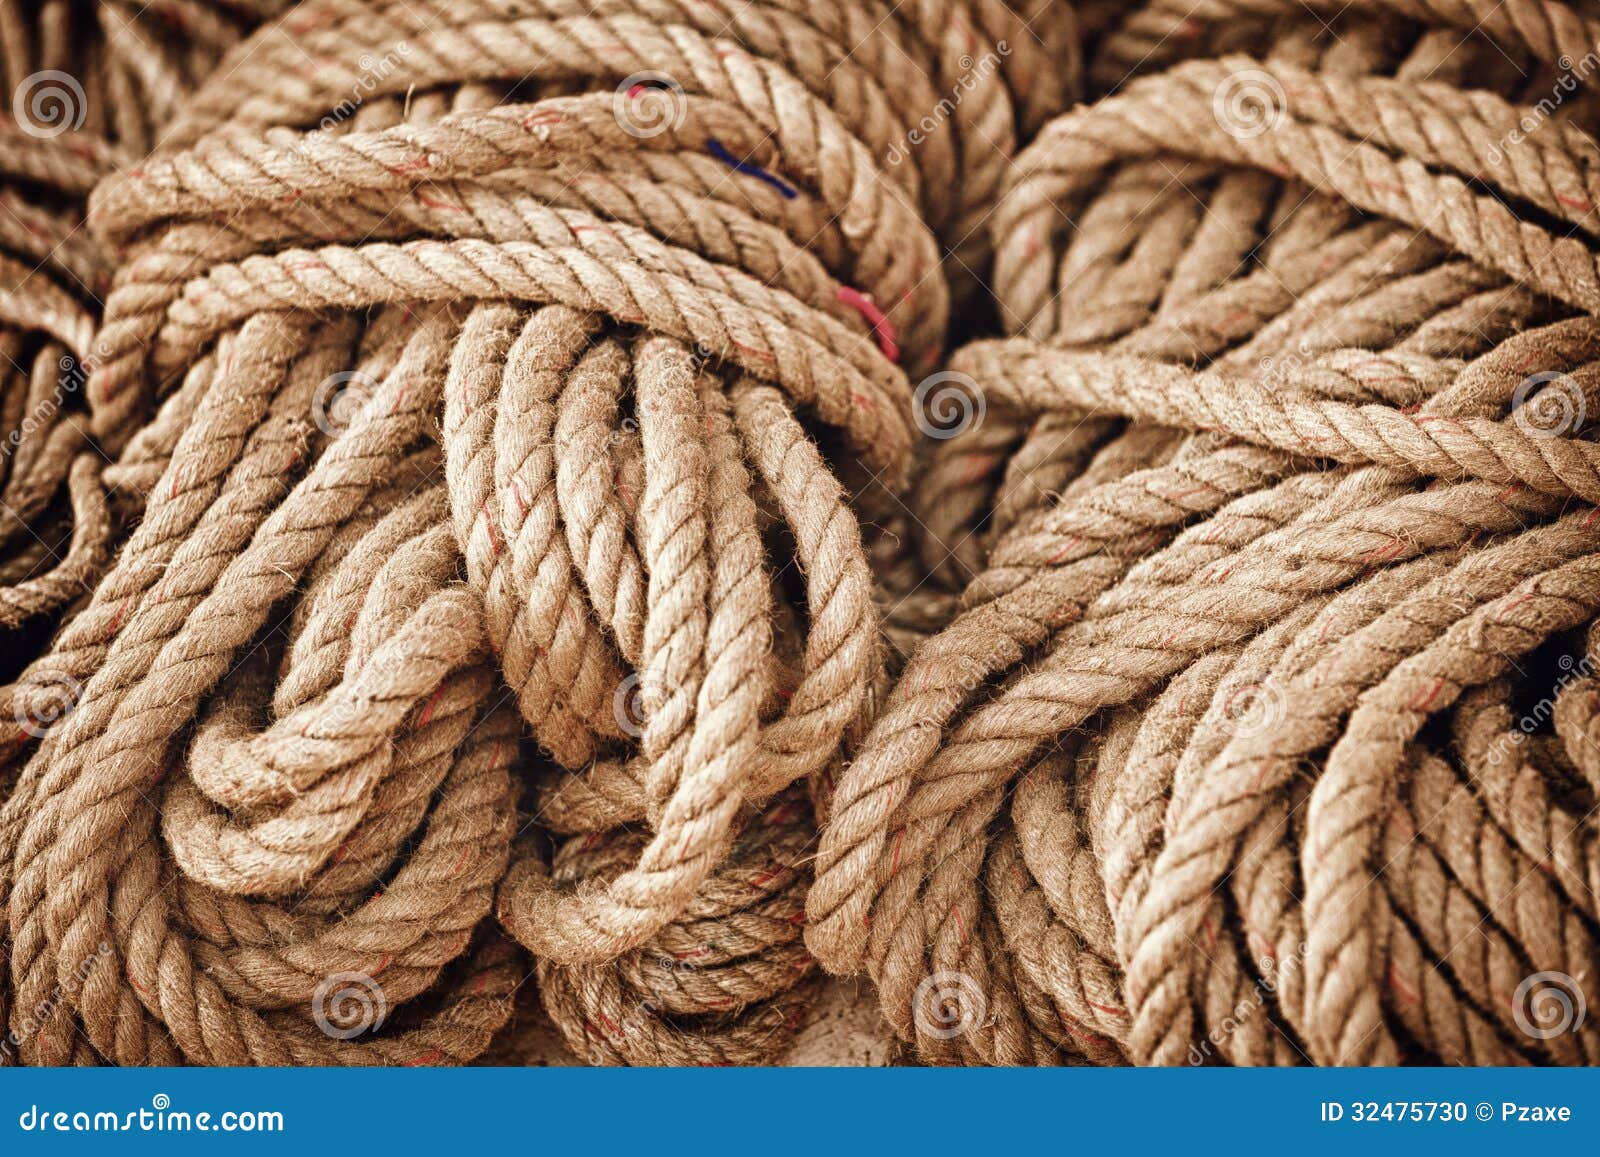 https://thumbs.dreamstime.com/z/thick-strong-rope-open-market-sold-32475730.jpg